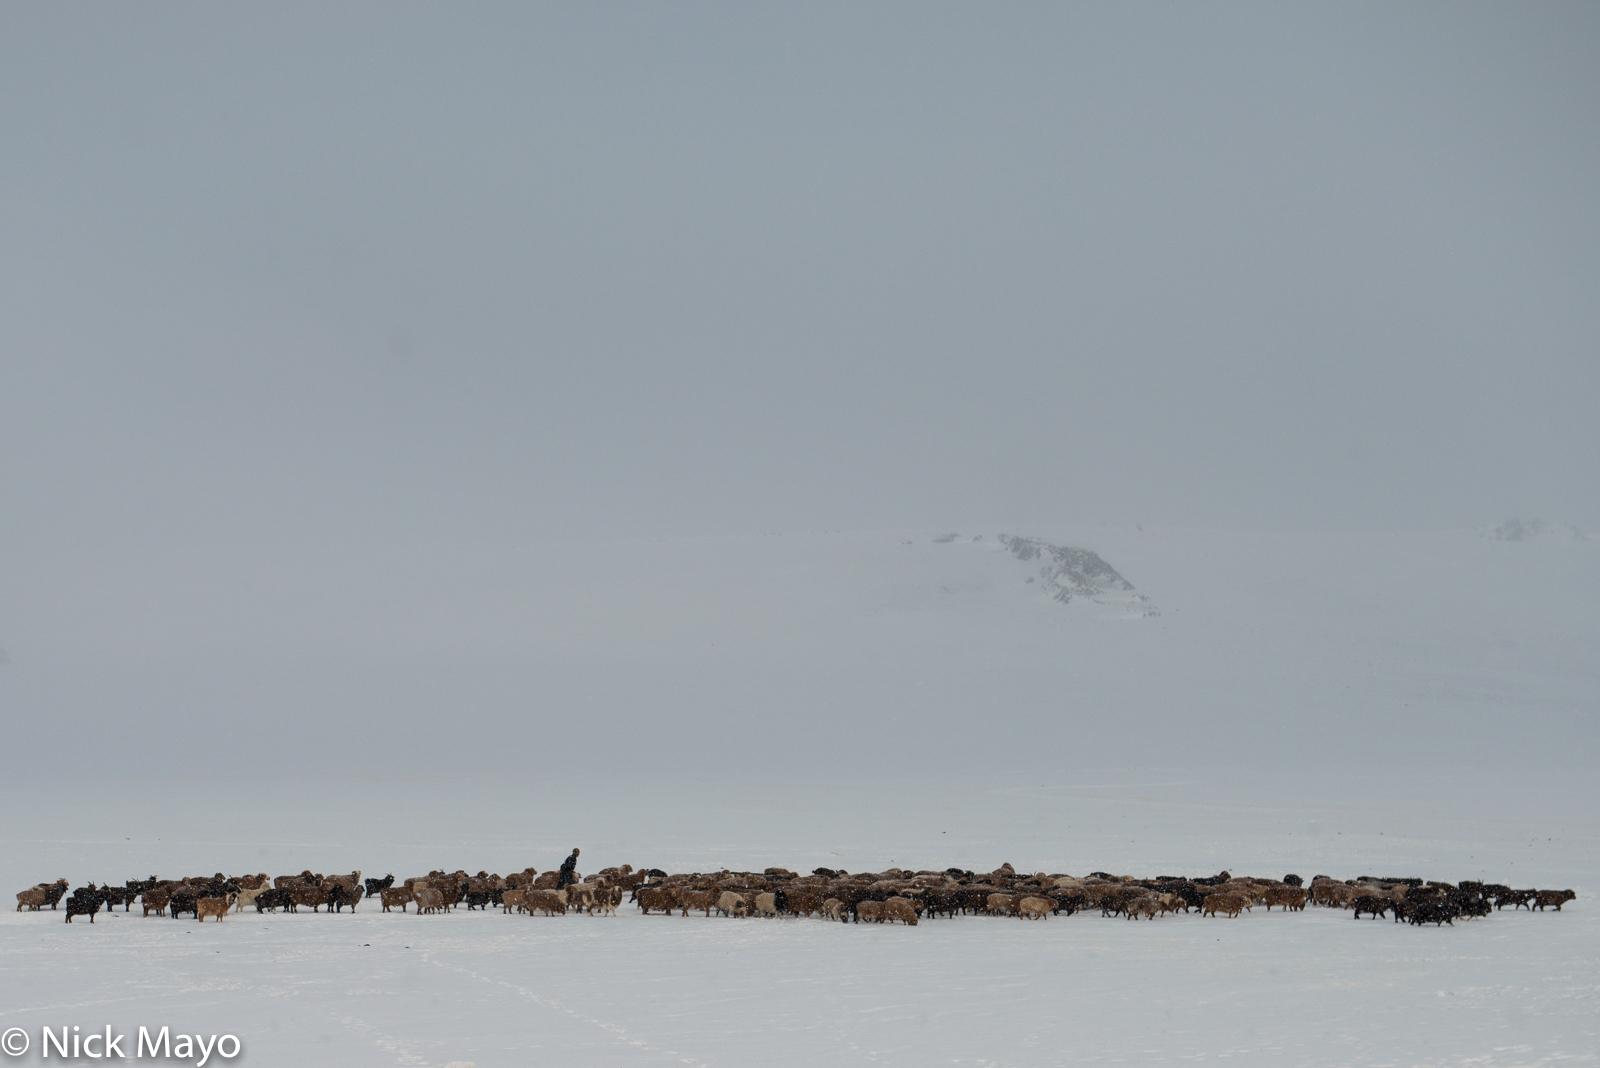 A Kazakh in Ulaakhus sum herding his sheep and goats during a spring snow storm.